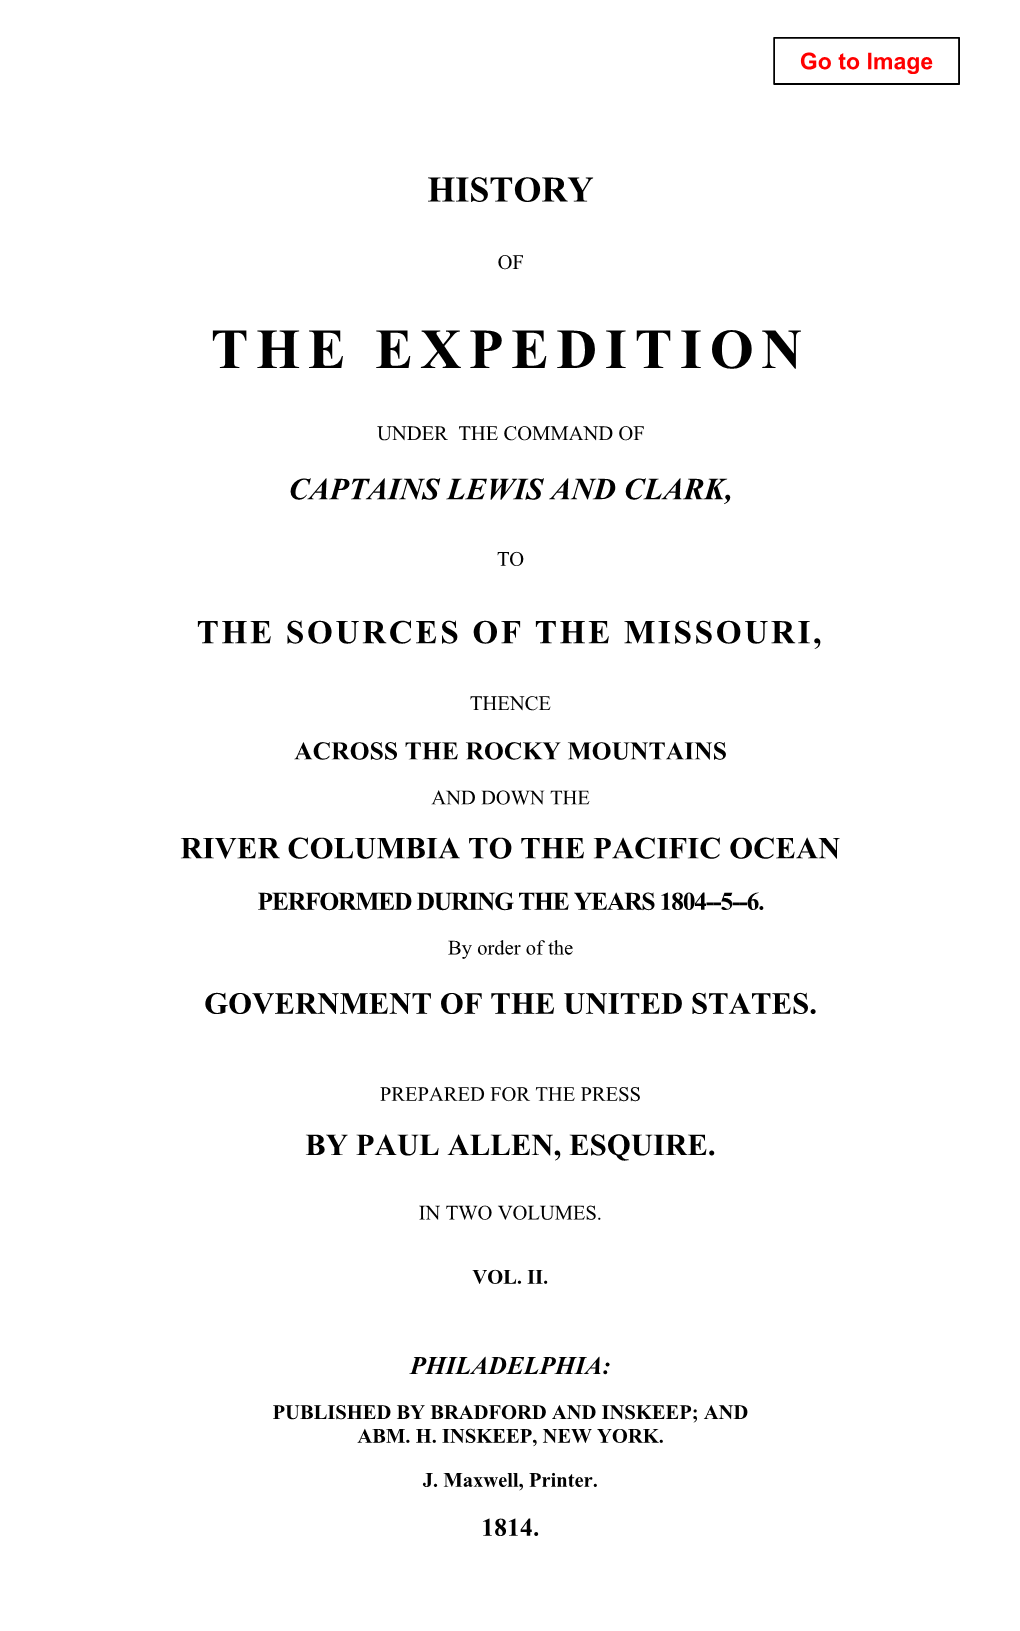 History of the Expedition Under the Command of Captains Lewis and Clark, to the Sources of the Missouri, Thence Across the Rocky